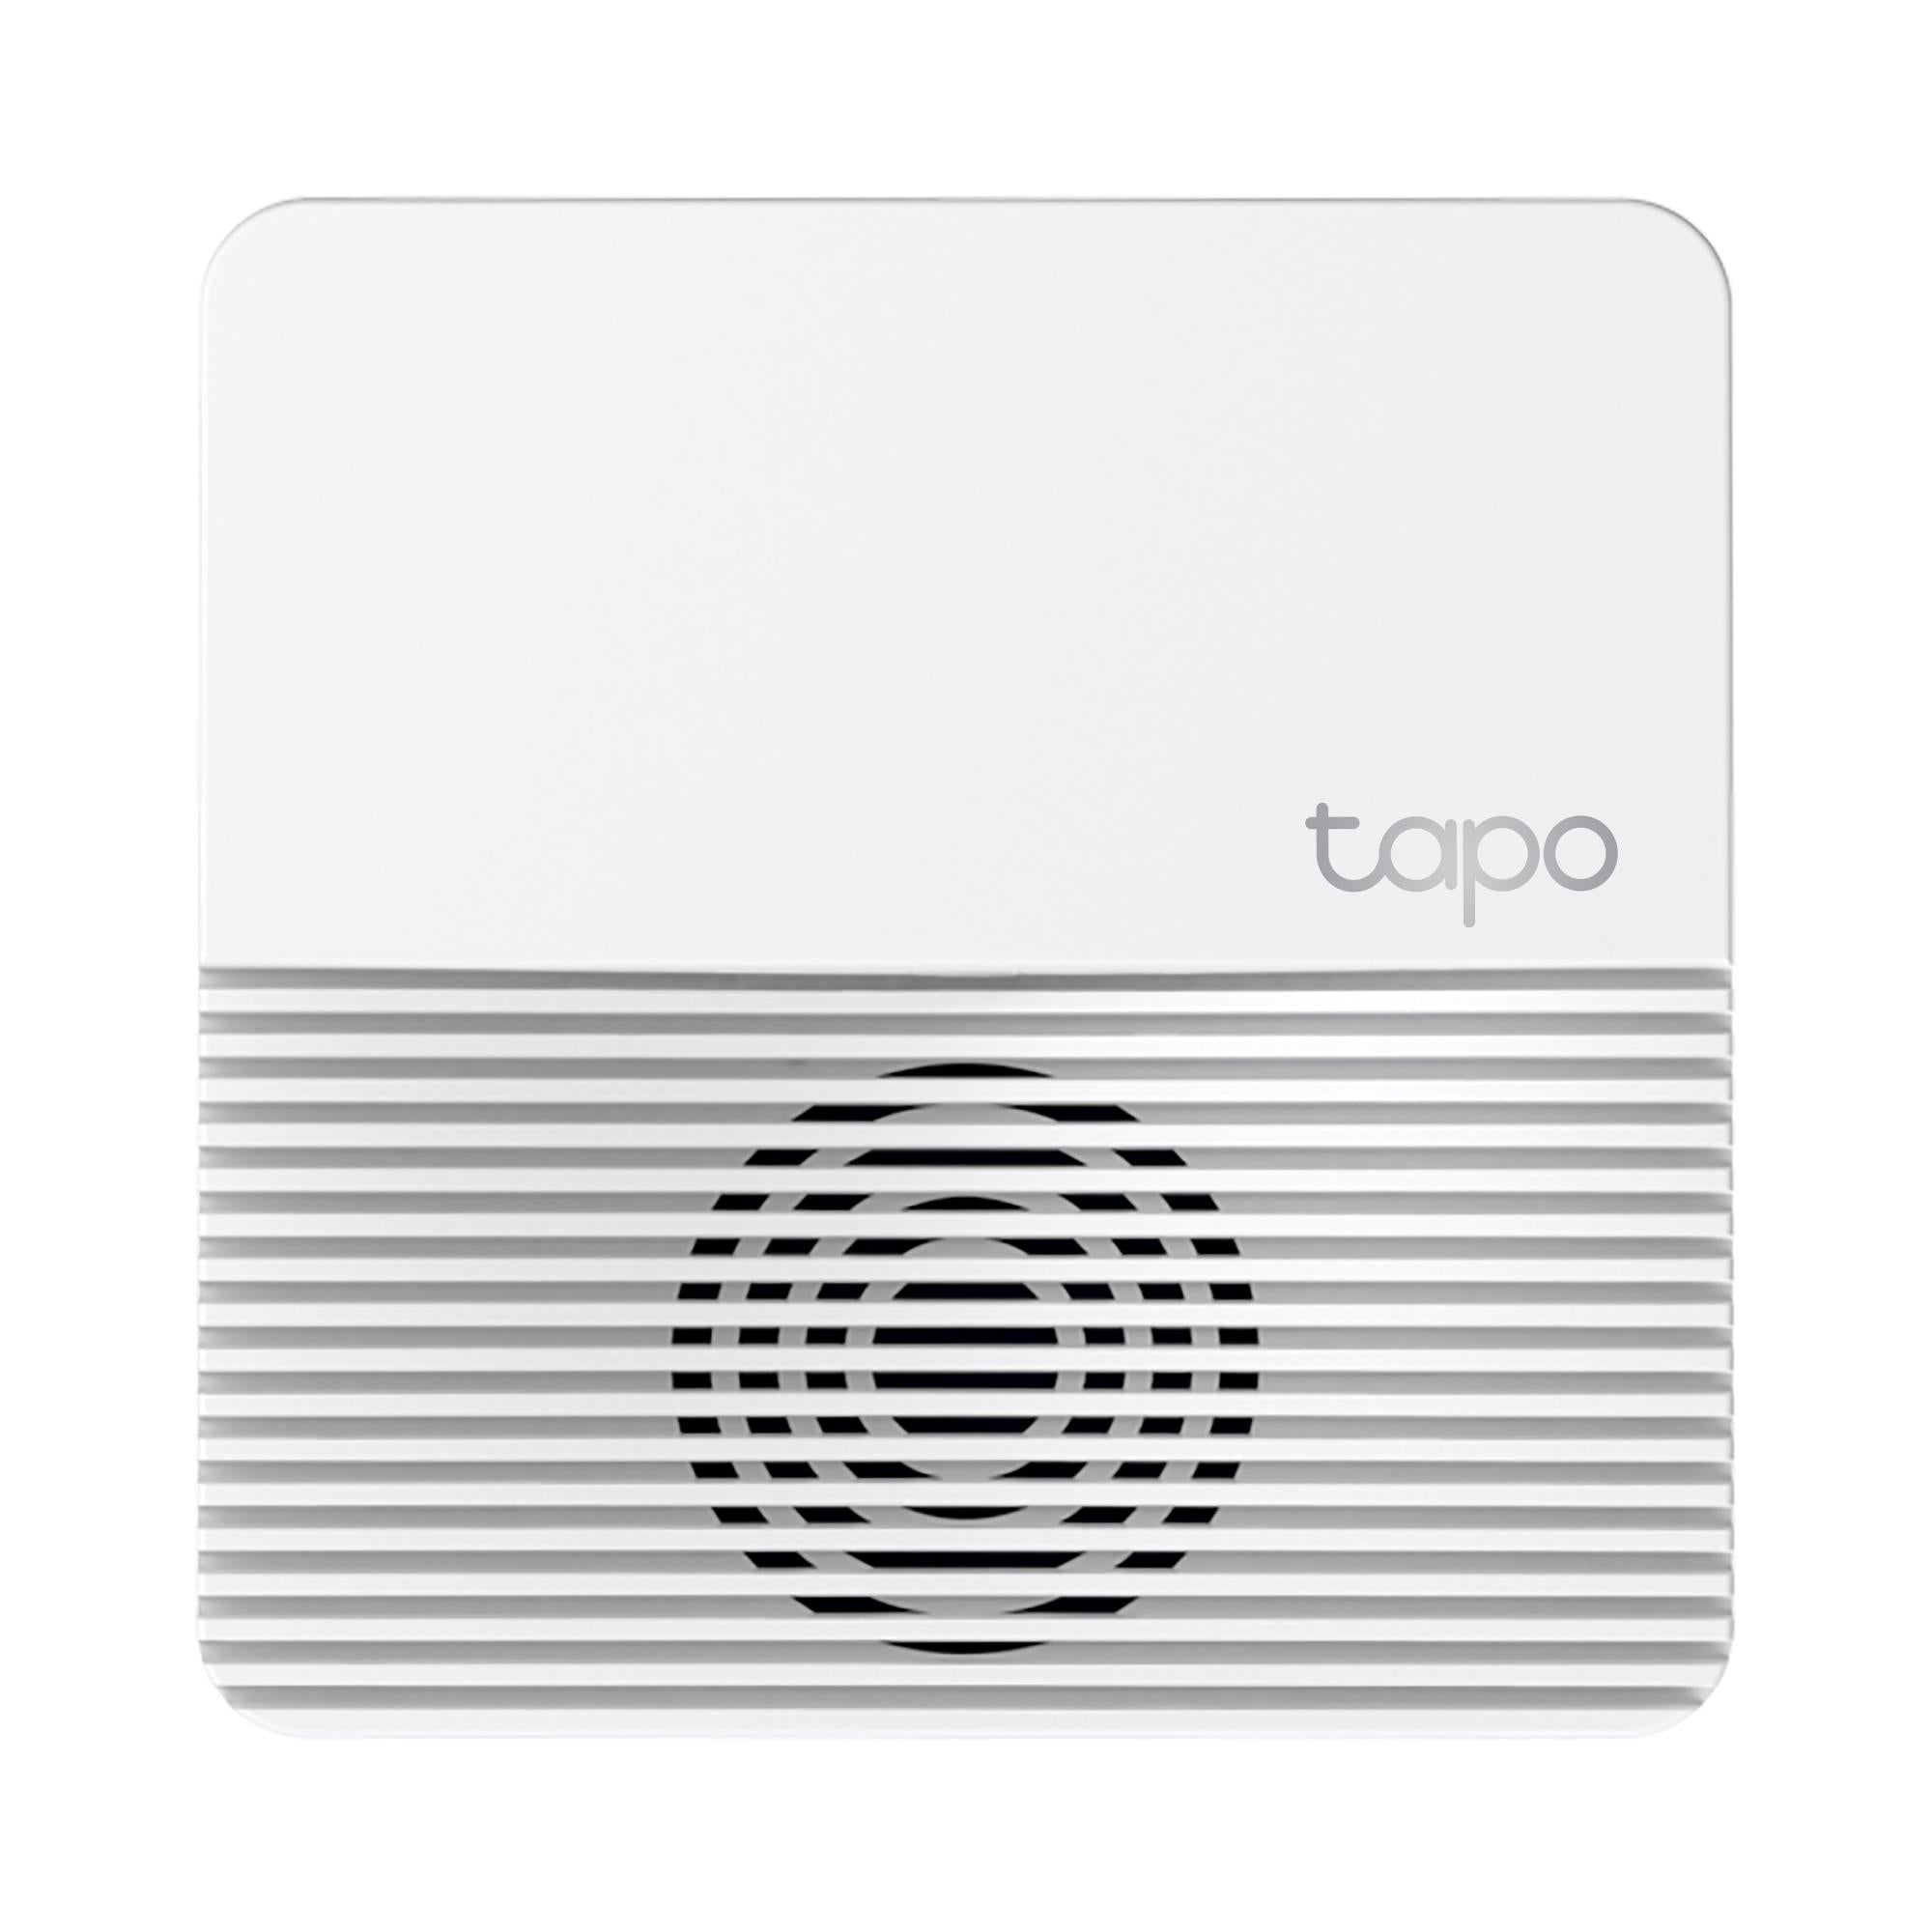 Tapo Smart Hub with Chime